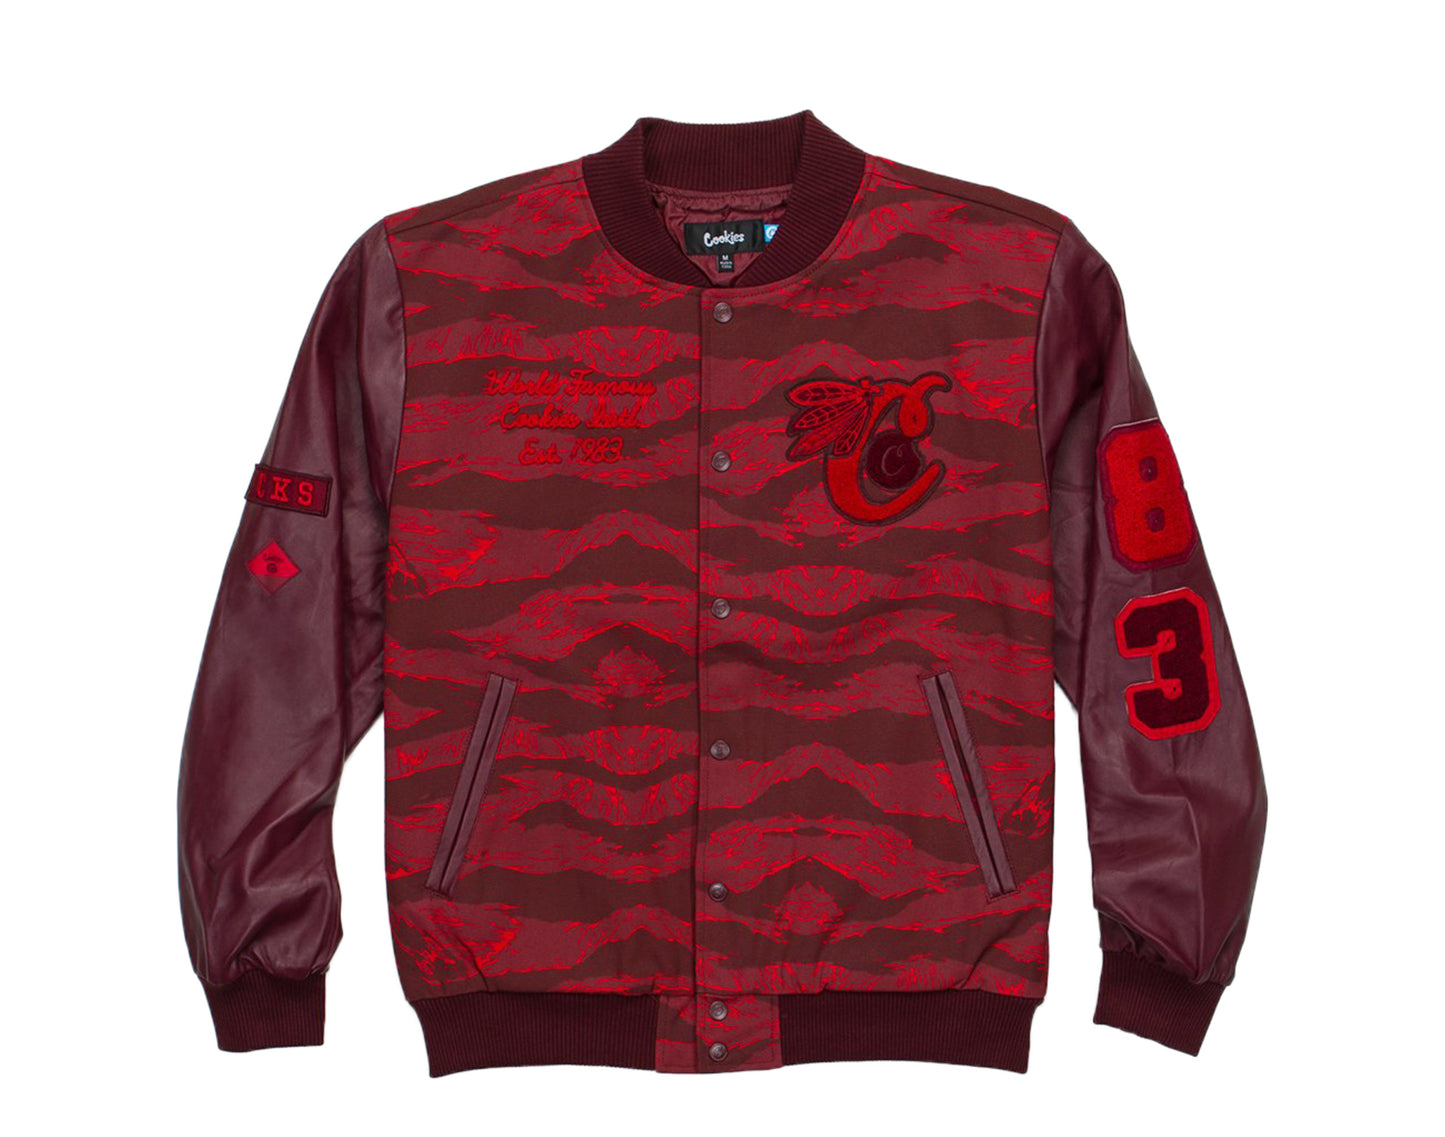 Cookies Top Of The Key Letterman Red Camo Men's Jacket  1546O4342-RED